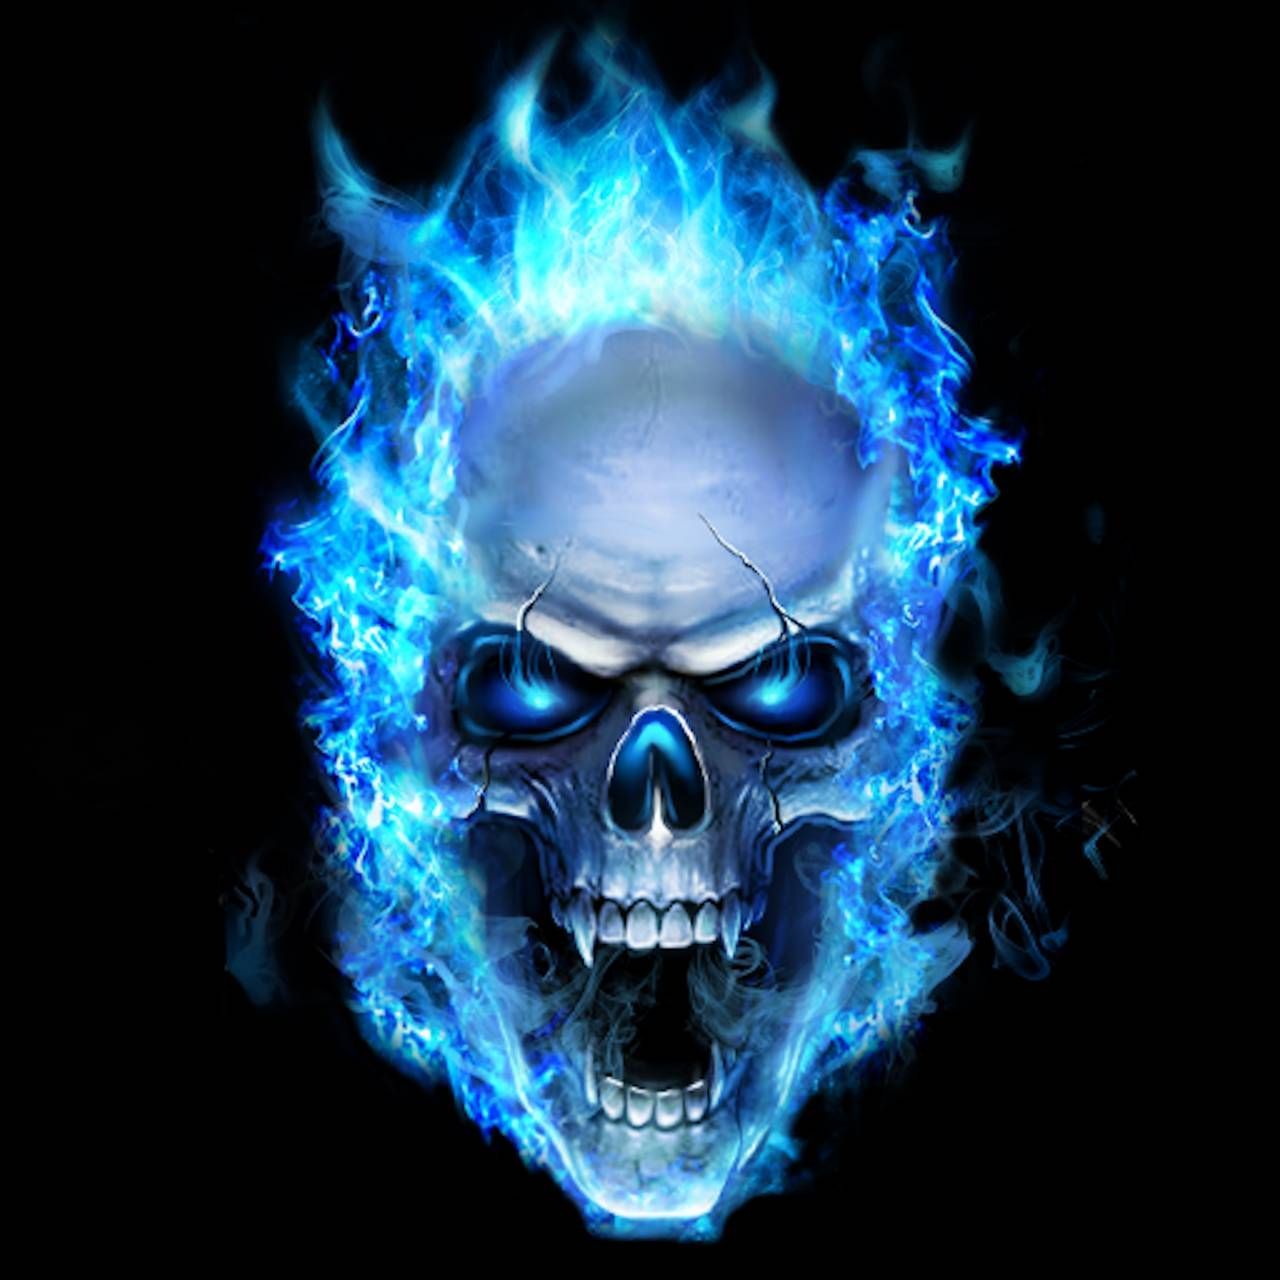 Download Scull Wallpaper by Gvozdenac now. Browse millions of popular blue Wallpaper. Skull wallpaper, Sugar skull wallpaper, Skull artwork